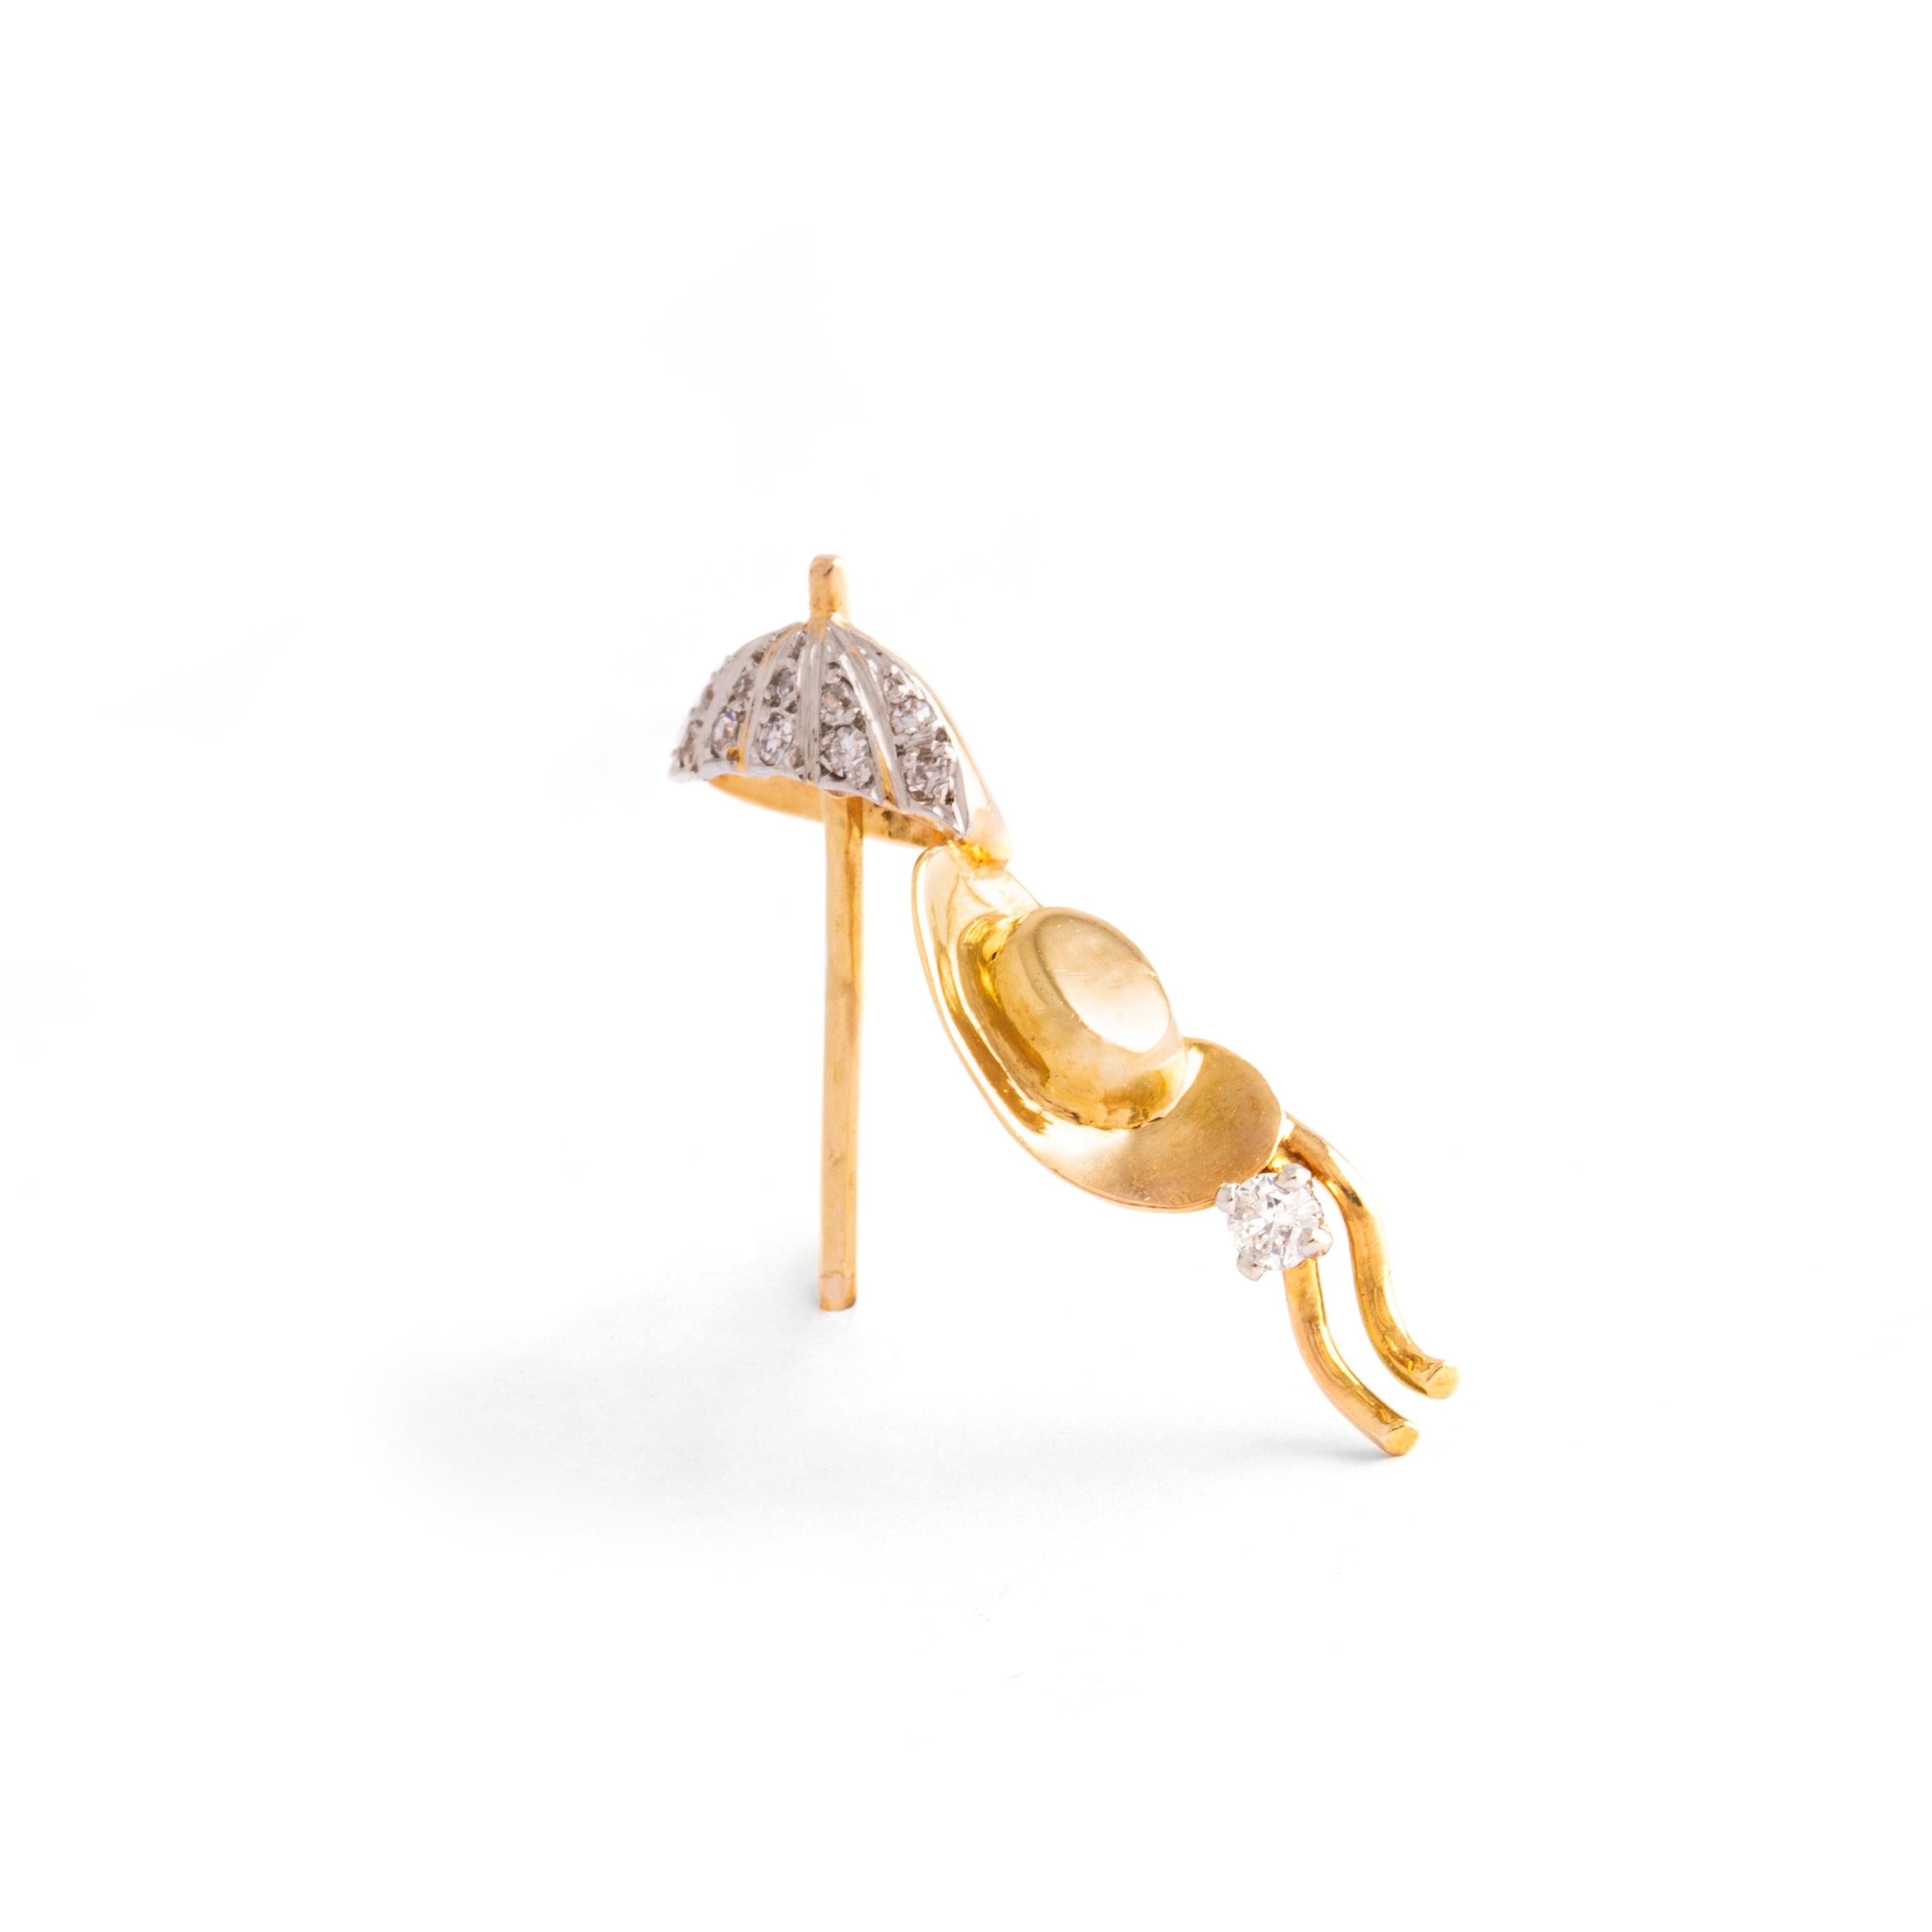 Diamond and Gold objet representing an umbrella and a hat.
Dimensions: 3.00 centimeters x 2.30 centimeters.

Total weight: 2.96 grams.
